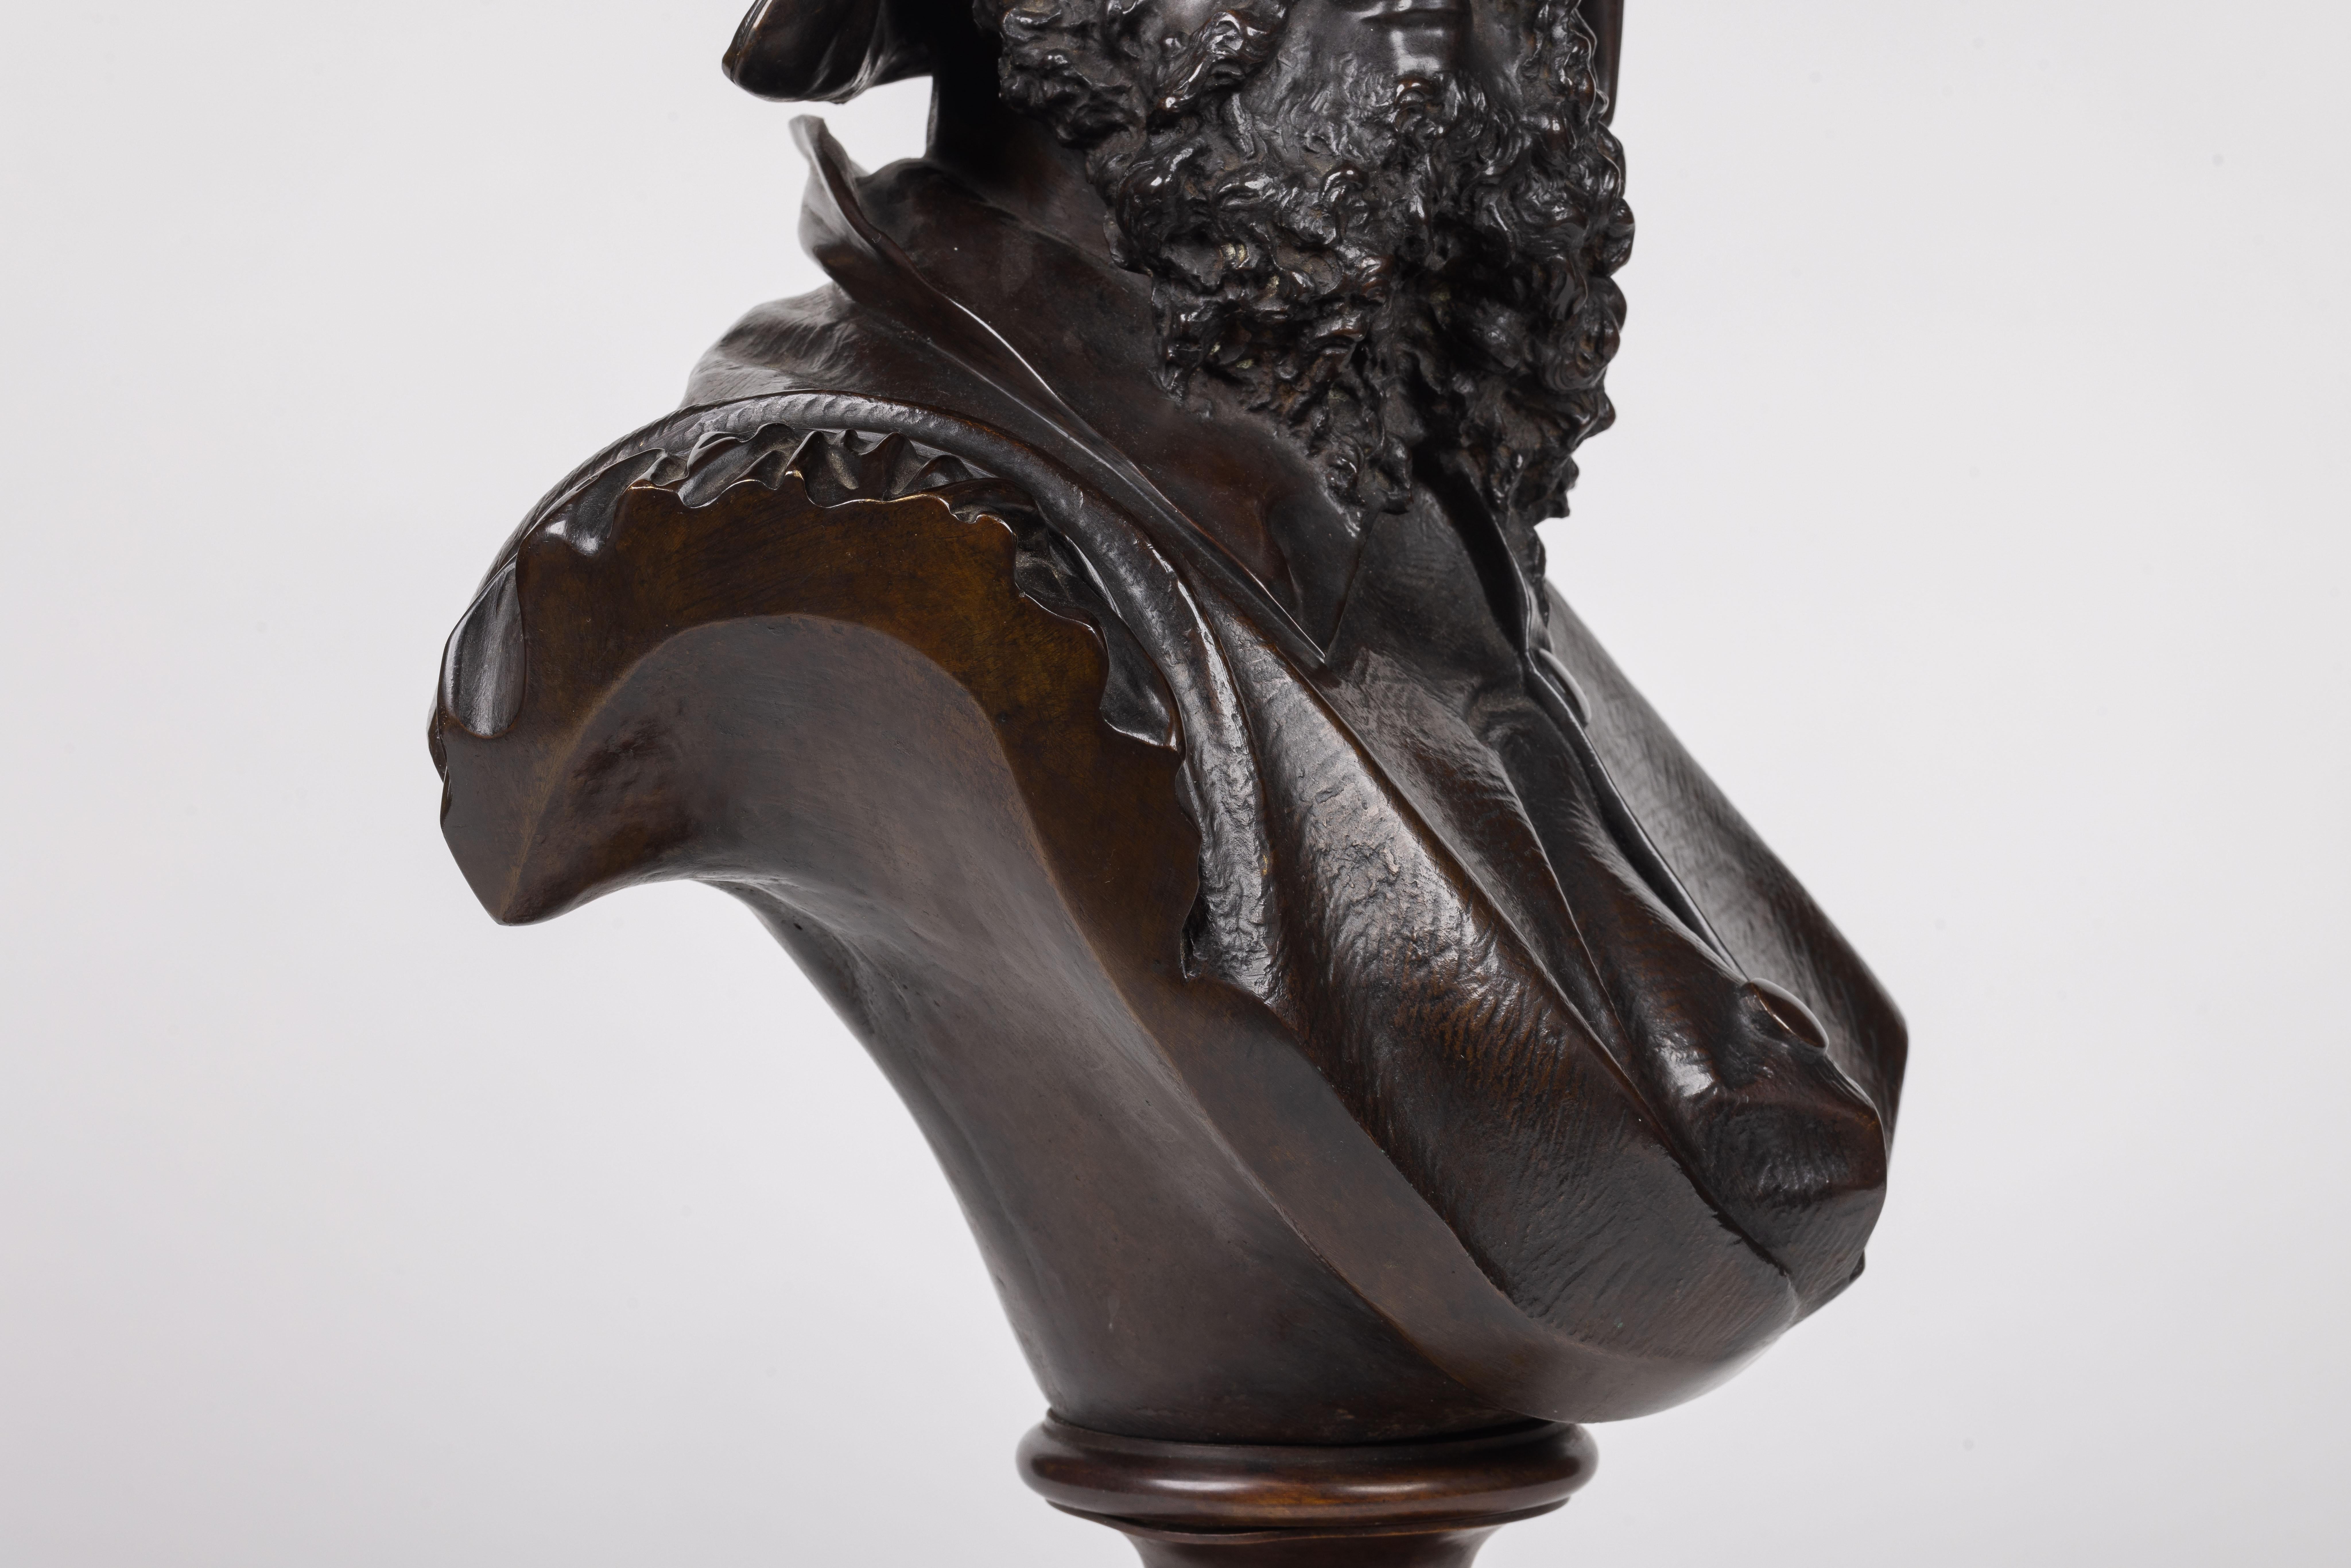 Albert-Ernest Carrier-Belleuse, A Rare and Important Bronze Bust of Michelangelo For Sale 4